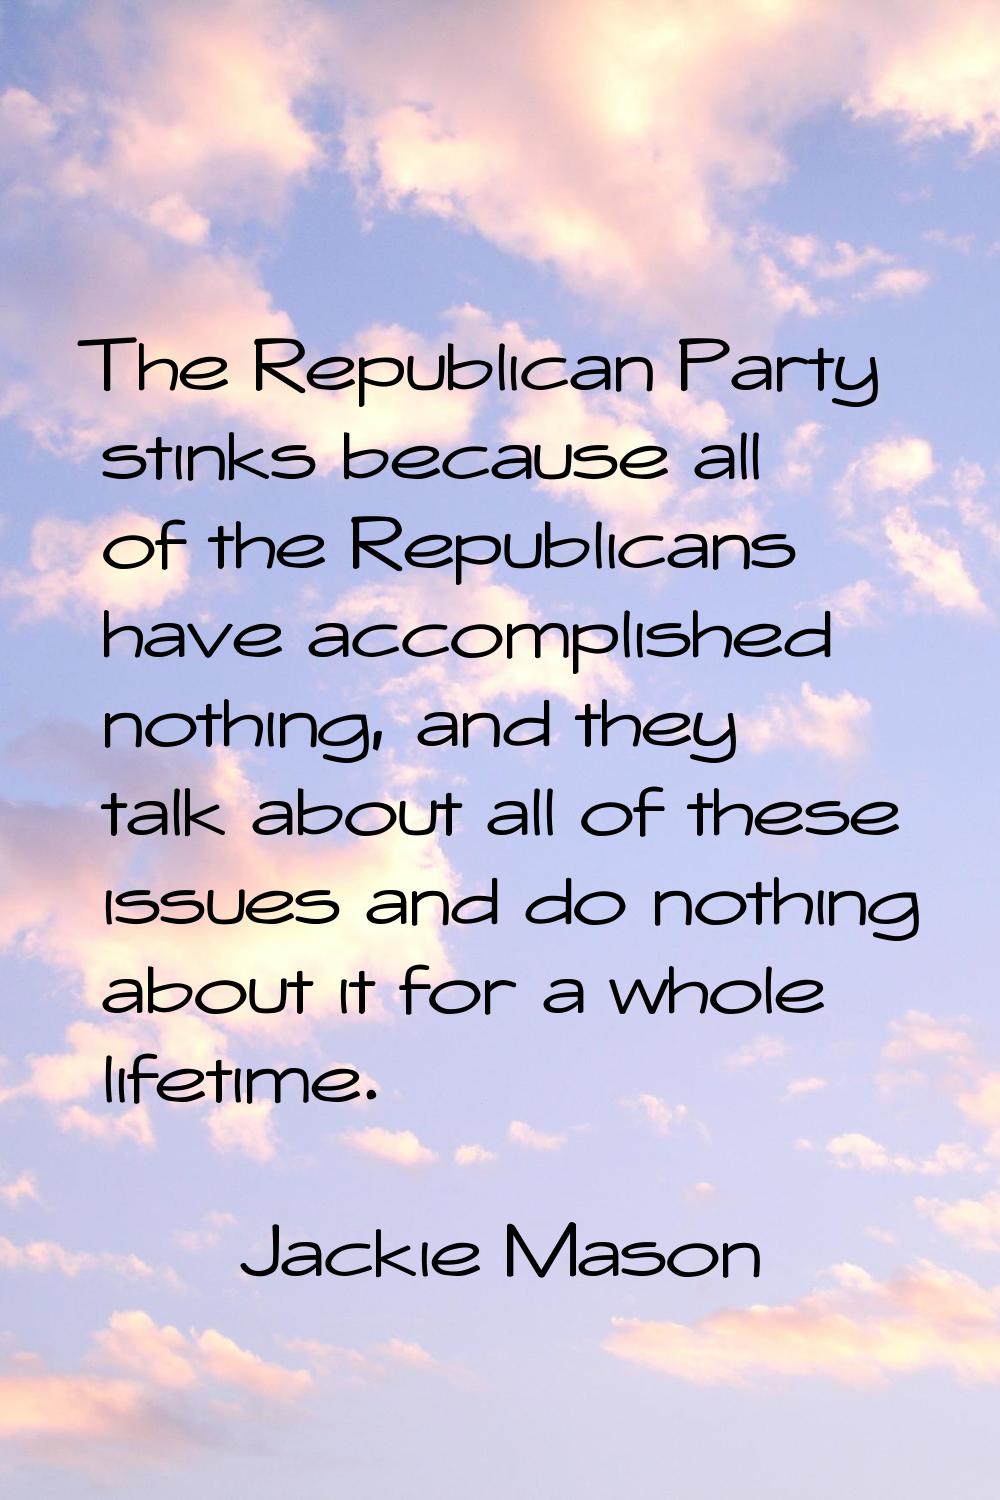 The Republican Party stinks because all of the Republicans have accomplished nothing, and they talk